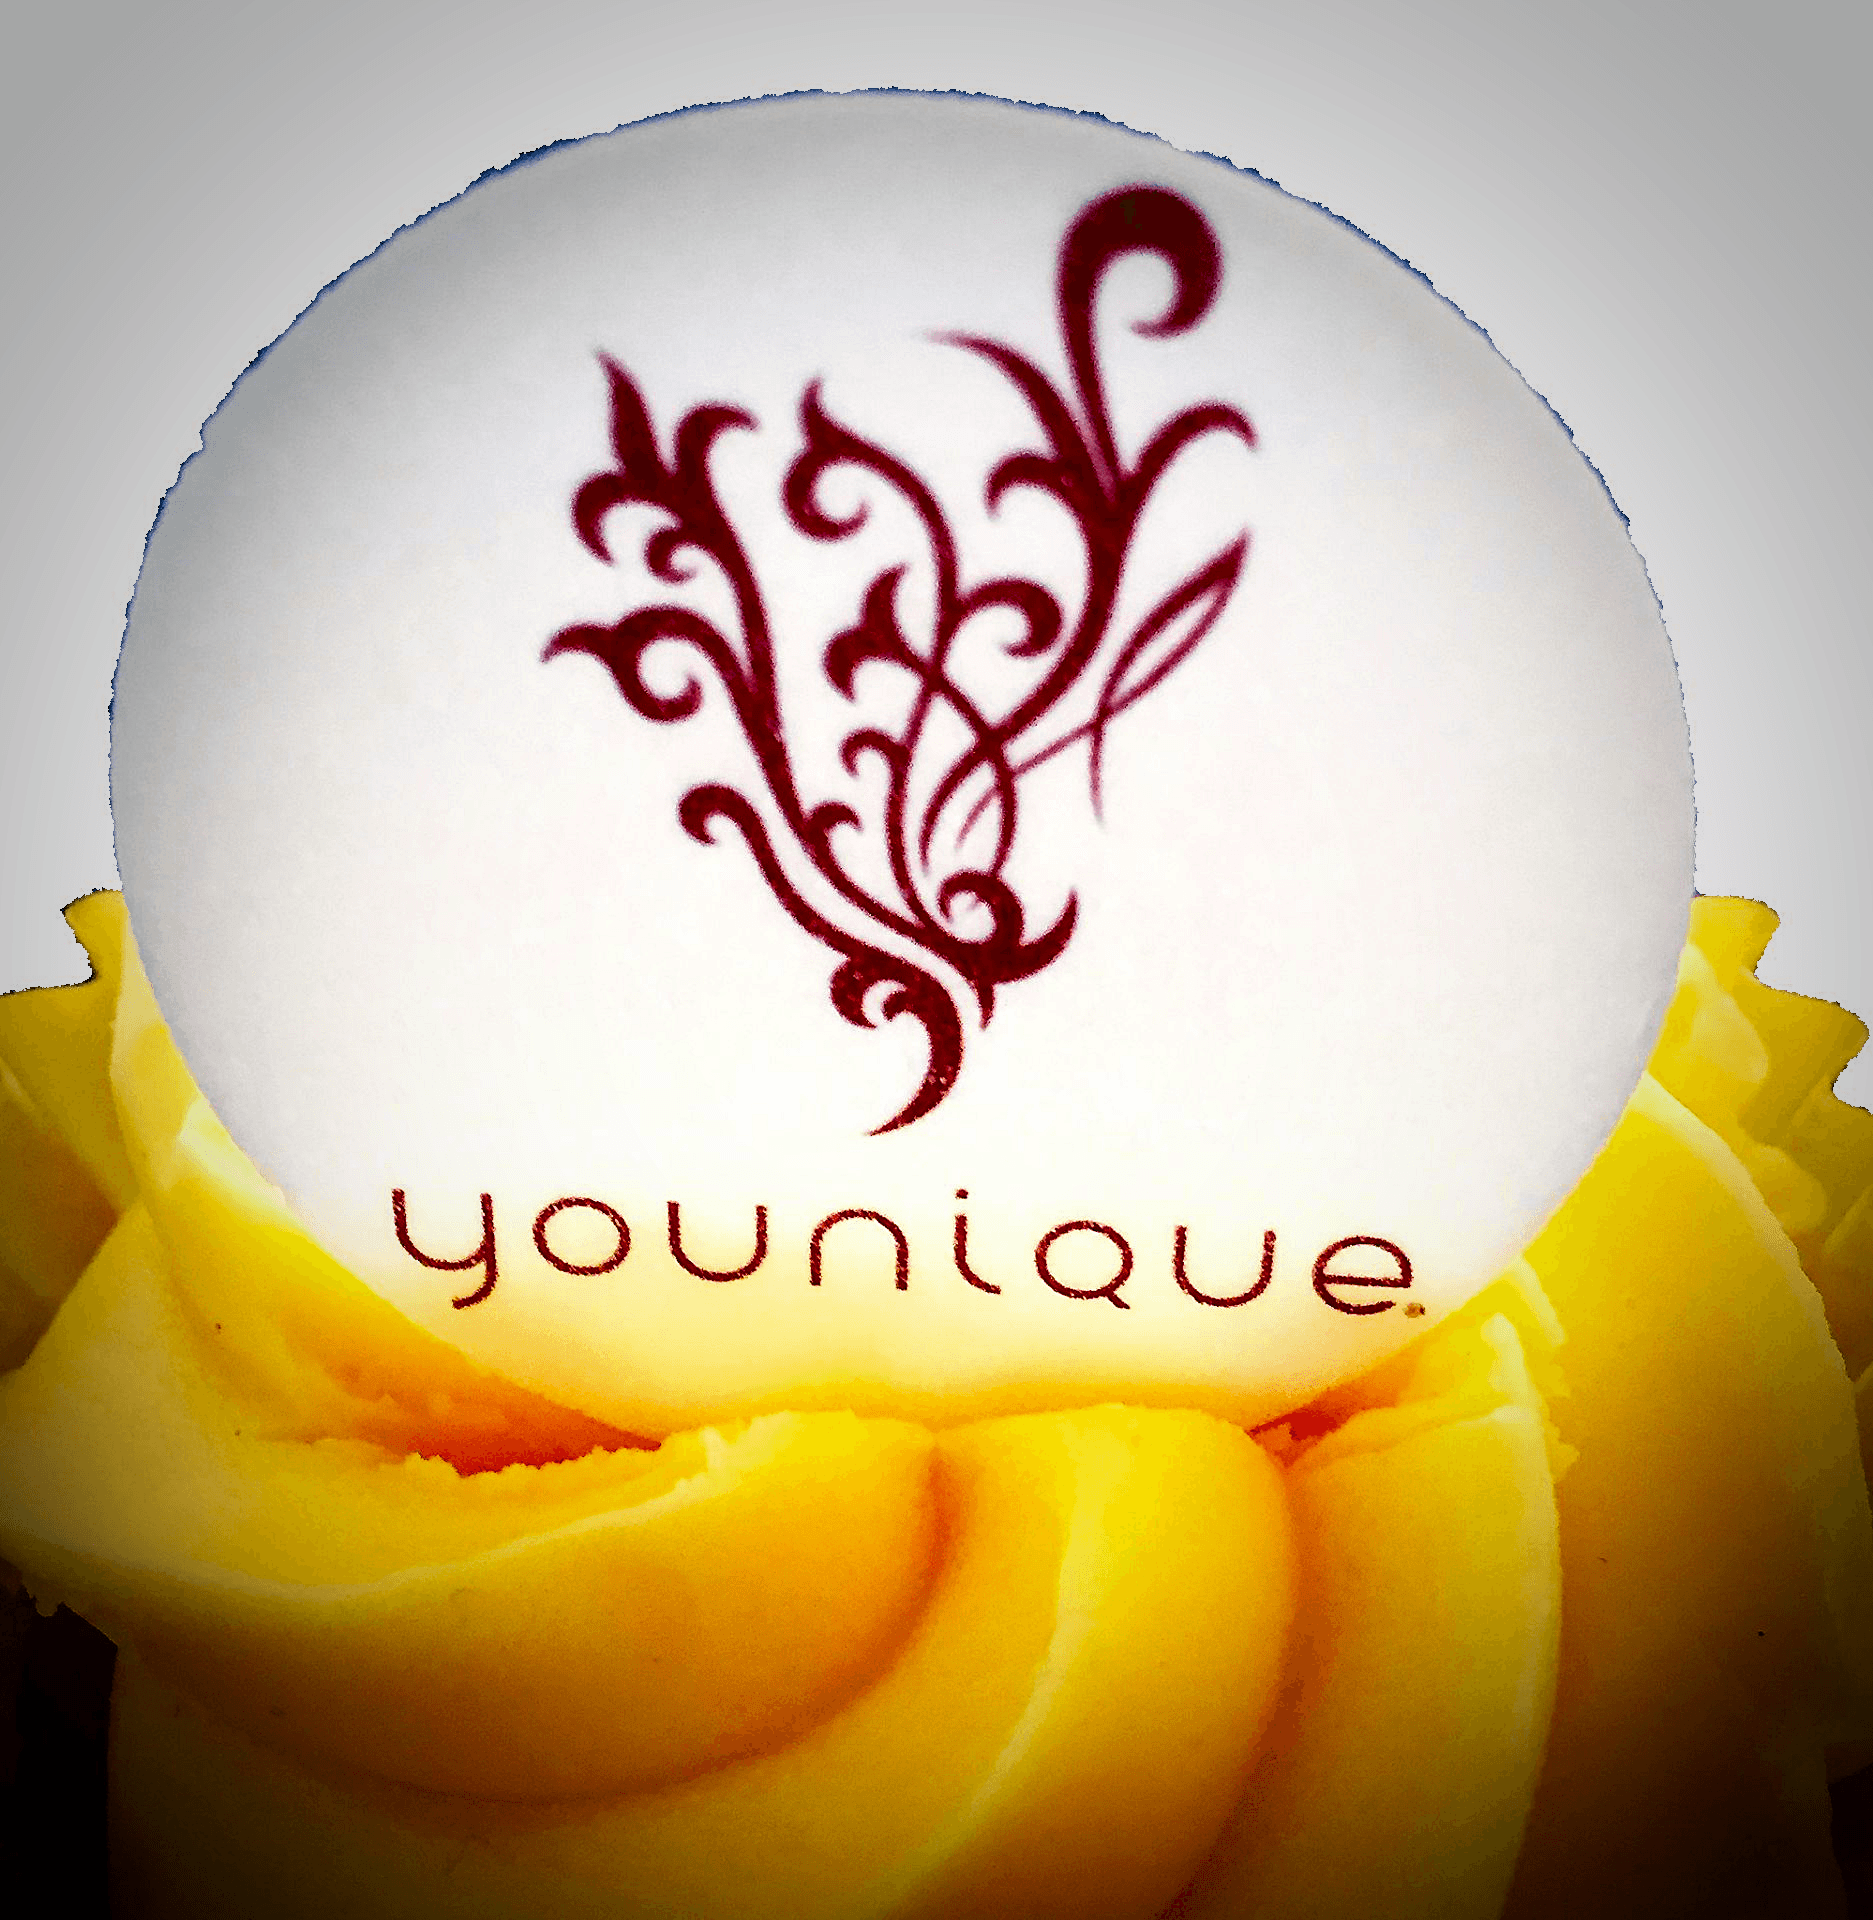 Younique Logo - Edible cake toppers decoration - Younique logo cake topper